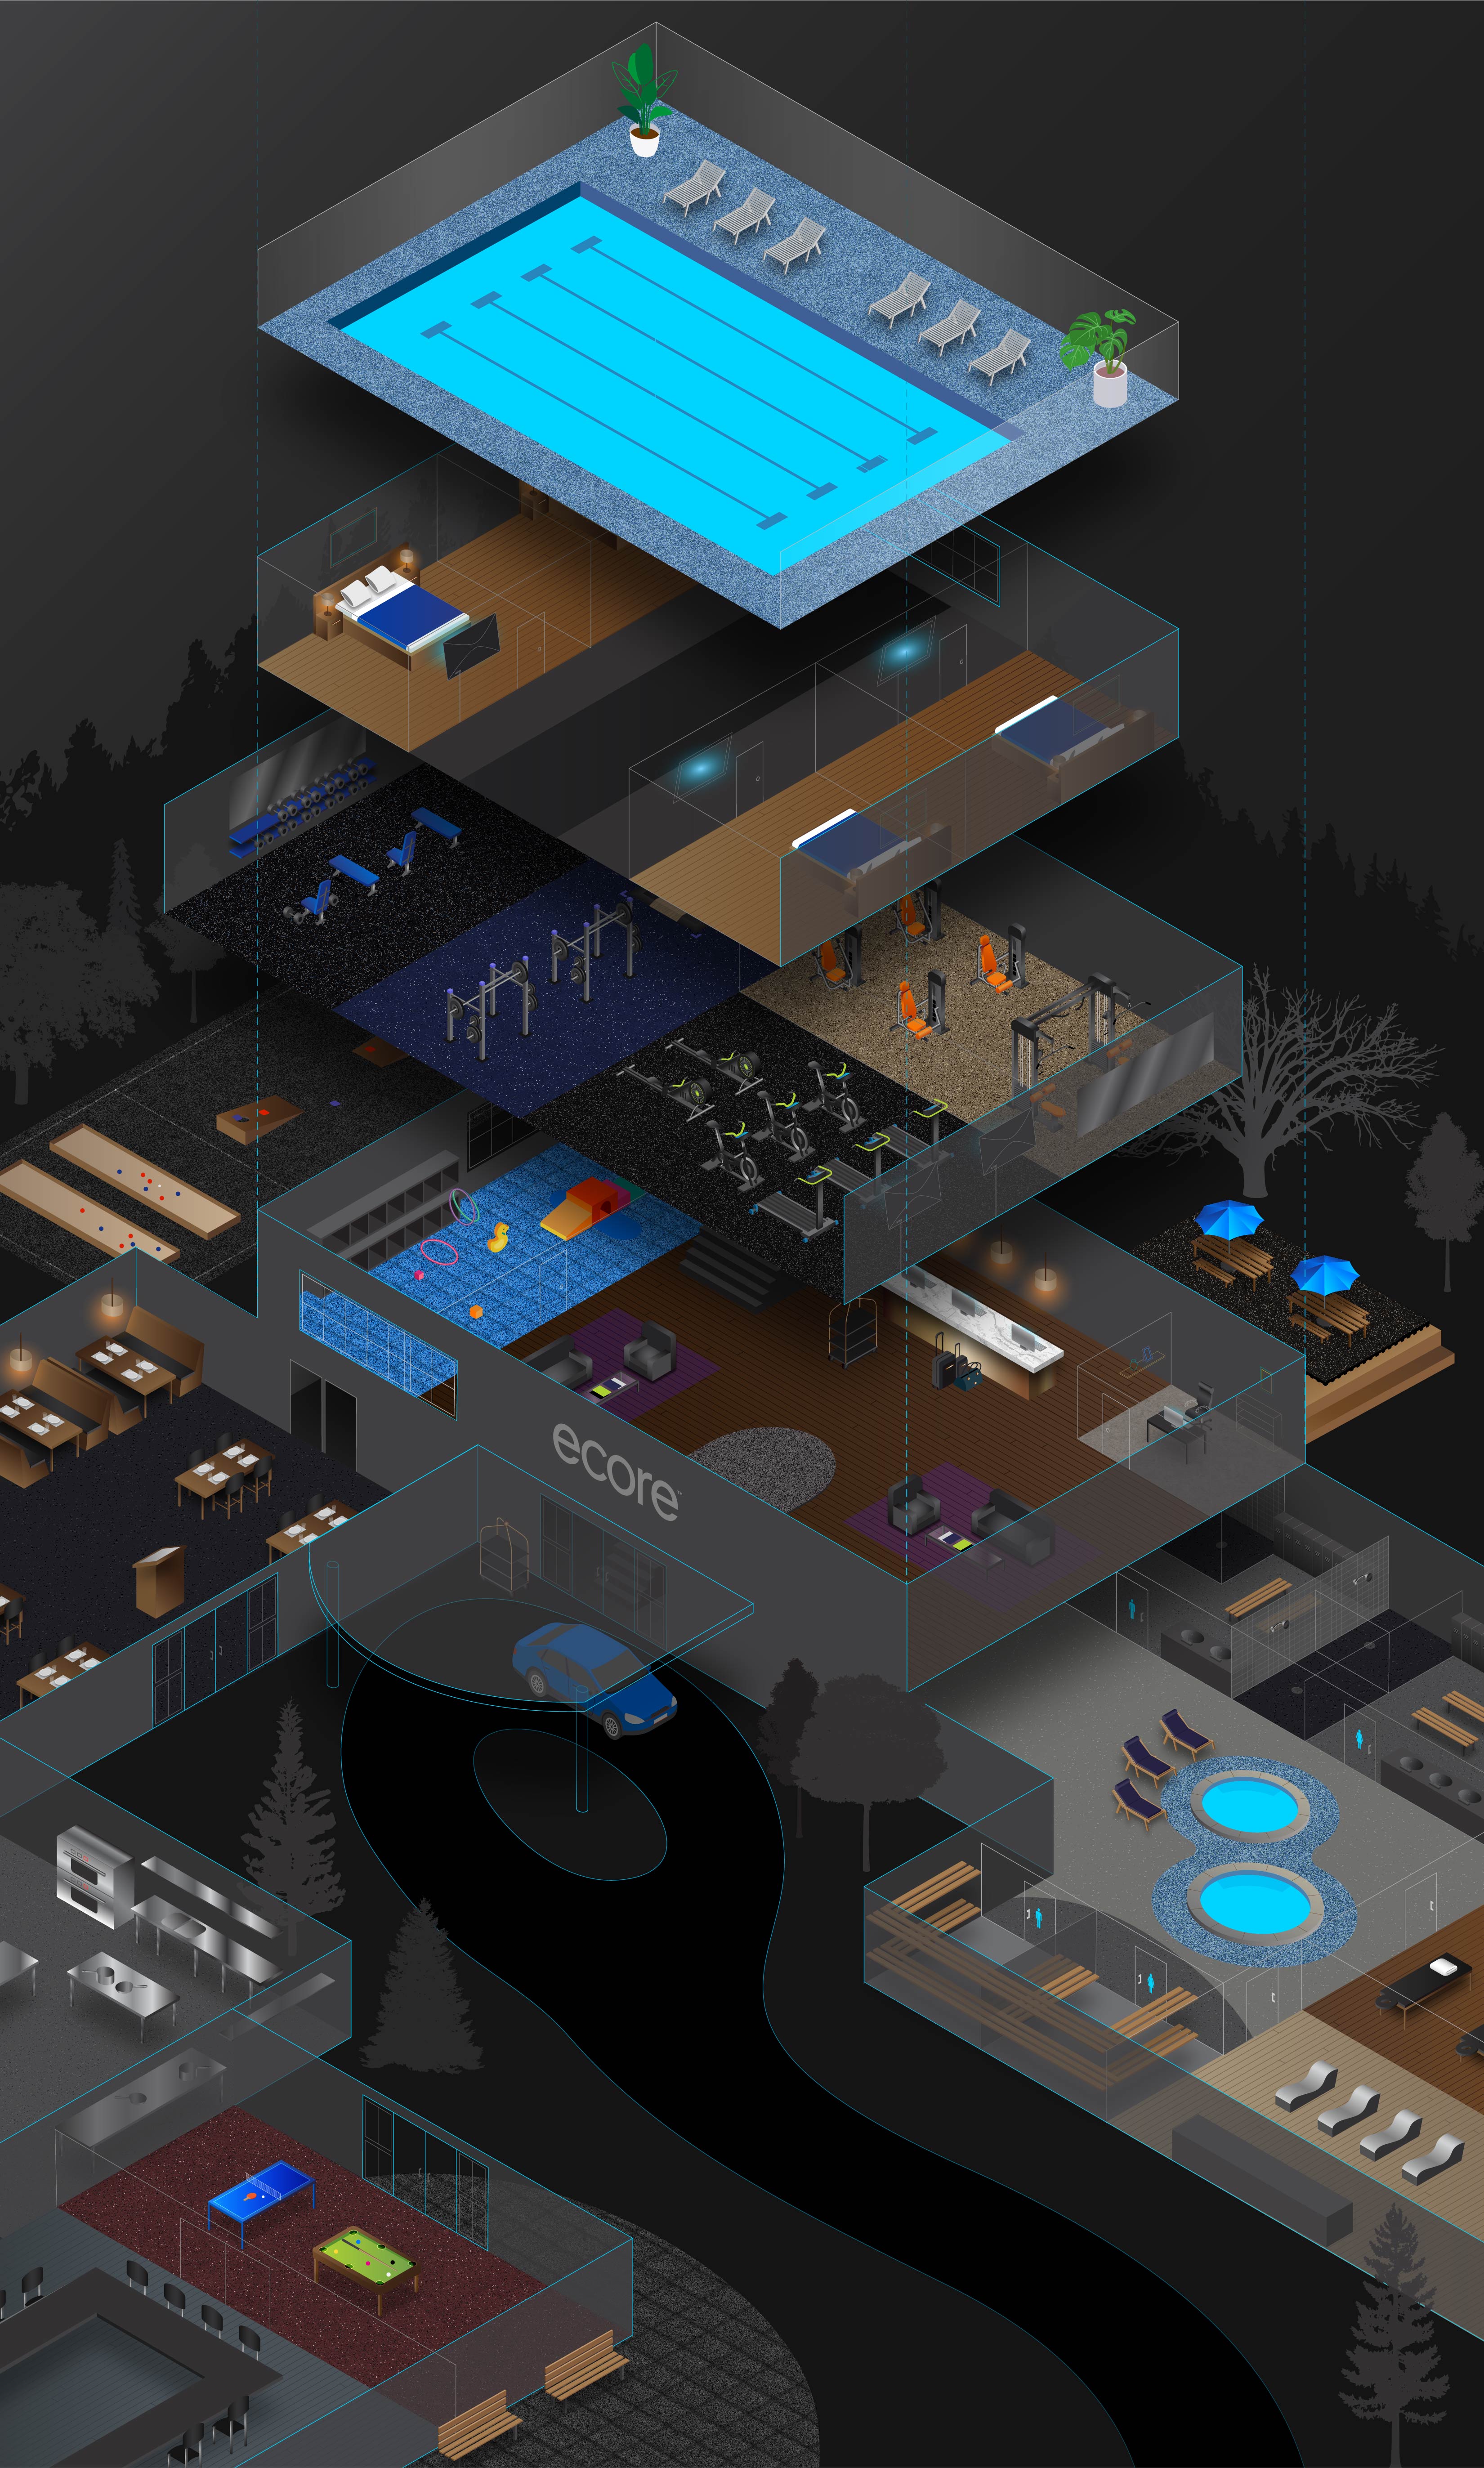 Blueprint of a hotel featuring suggested Ecore flooring options for each room or space